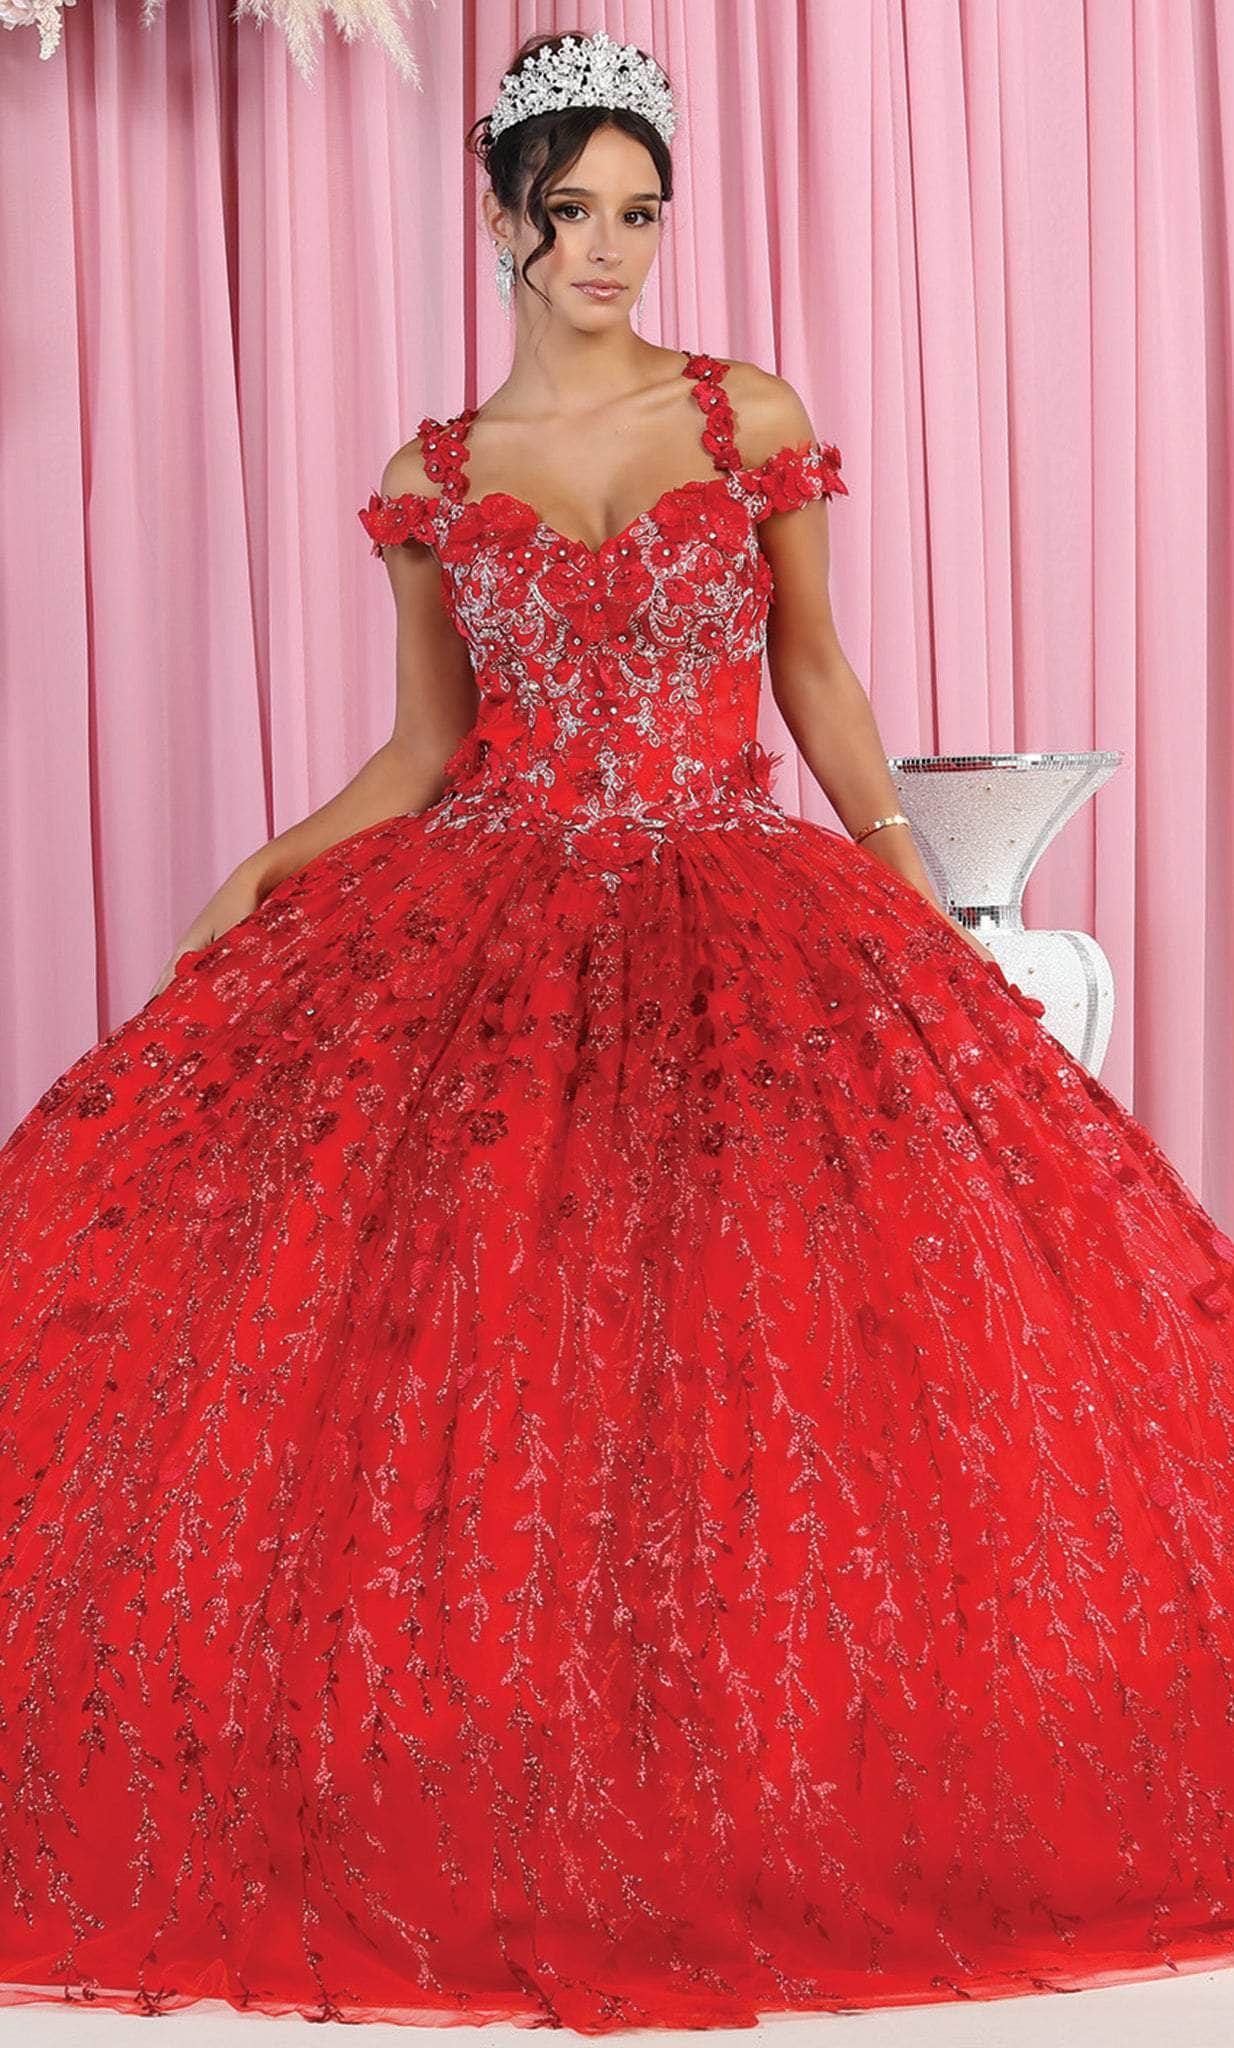 May Queen LK172 - Cold Shoulder Quinceanera Ballgown Quinceanera Dresses 4 / Red